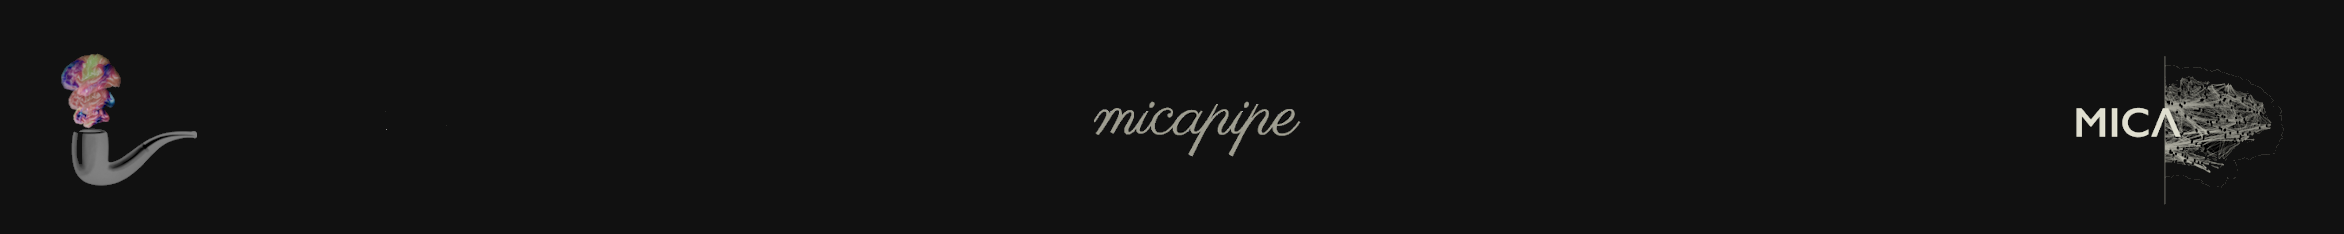 micapipe_long.png